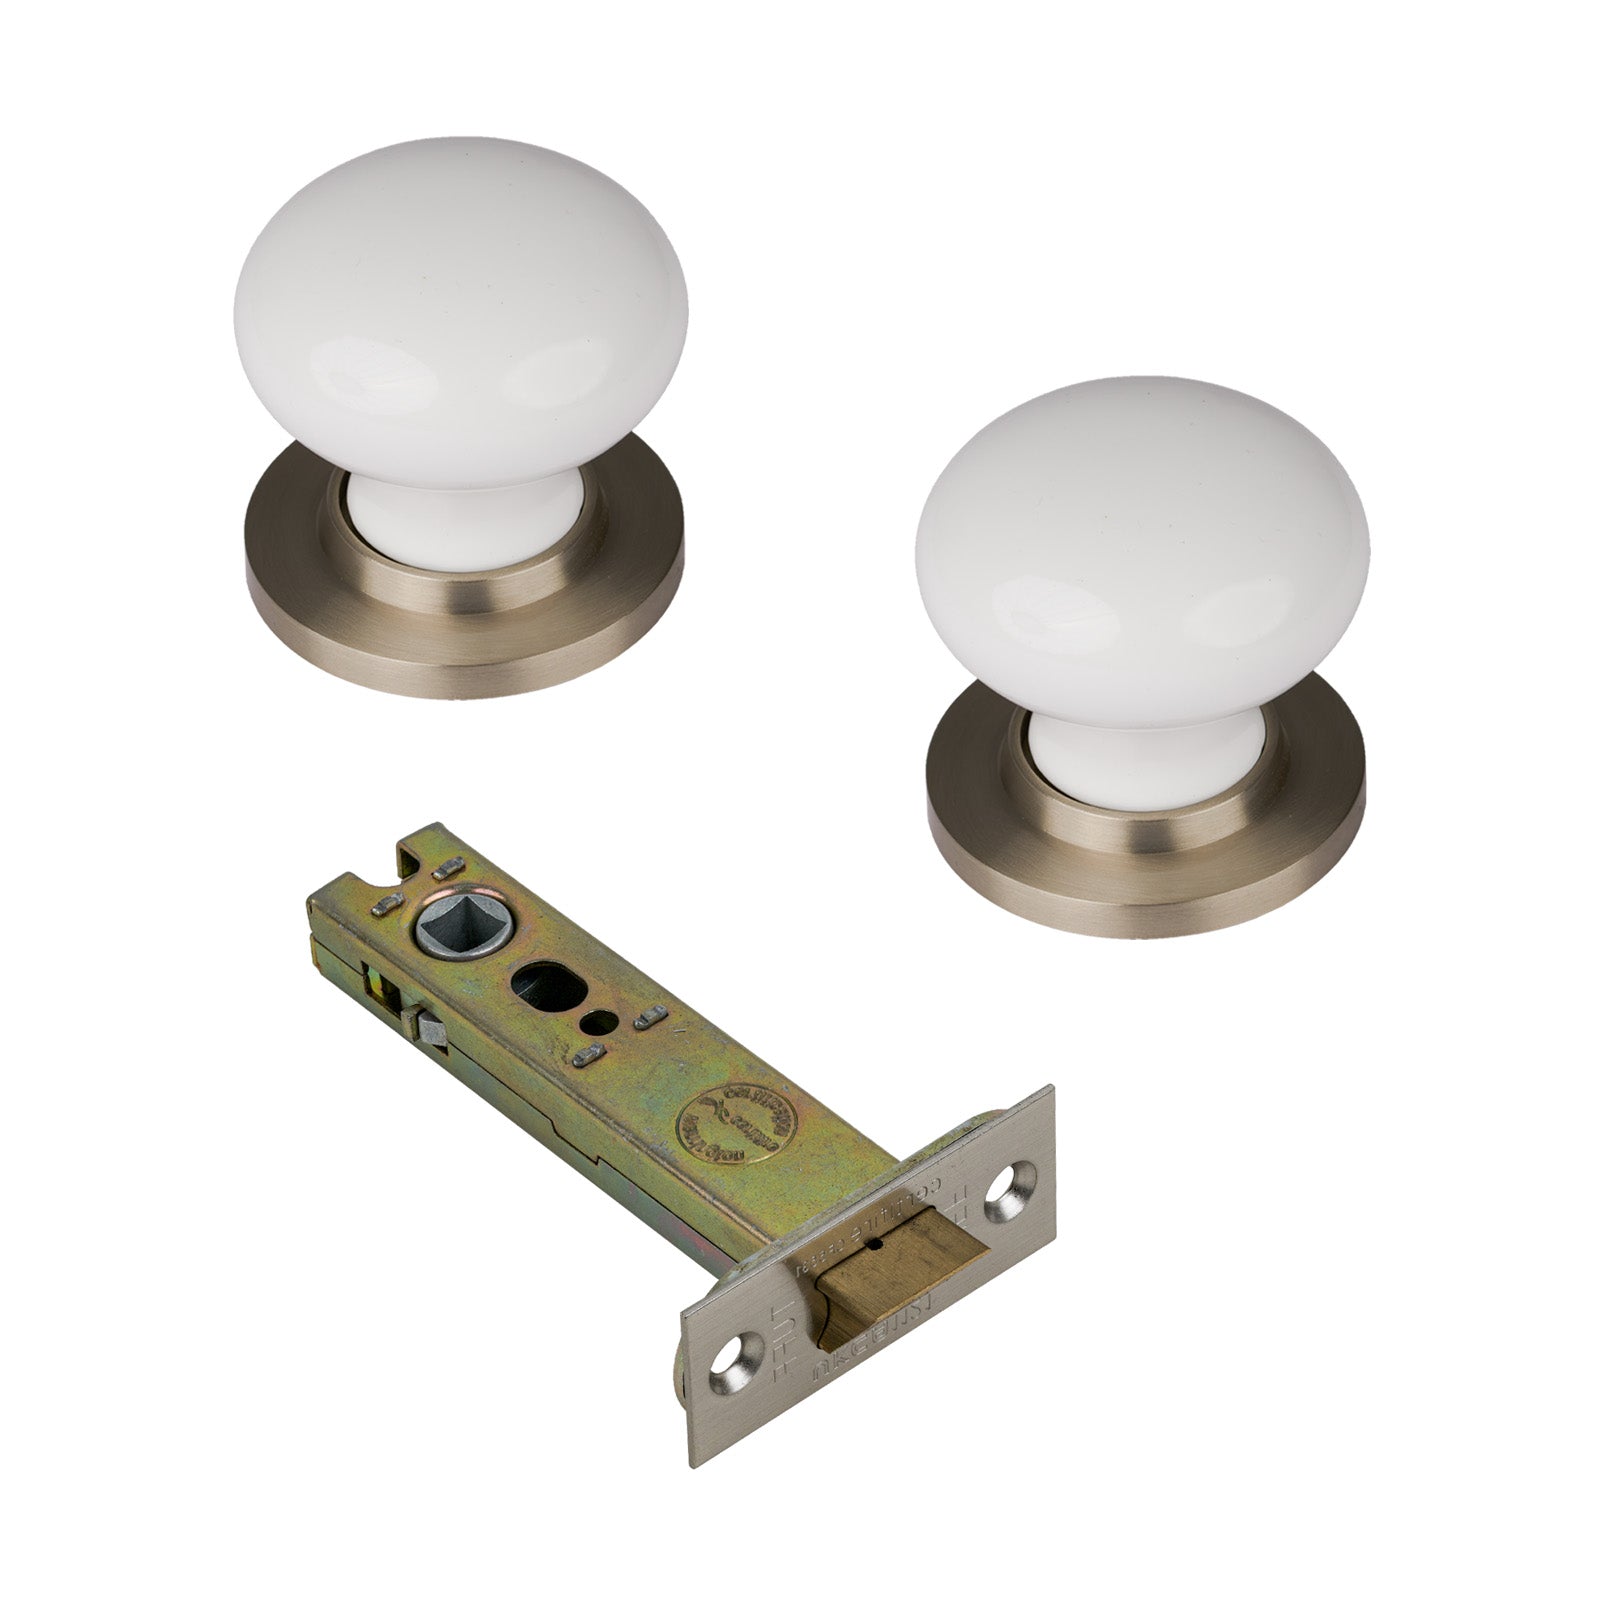 SHOW Plain White Porcelain Door Knob with Satin Nickel Rose with 4 inch latch